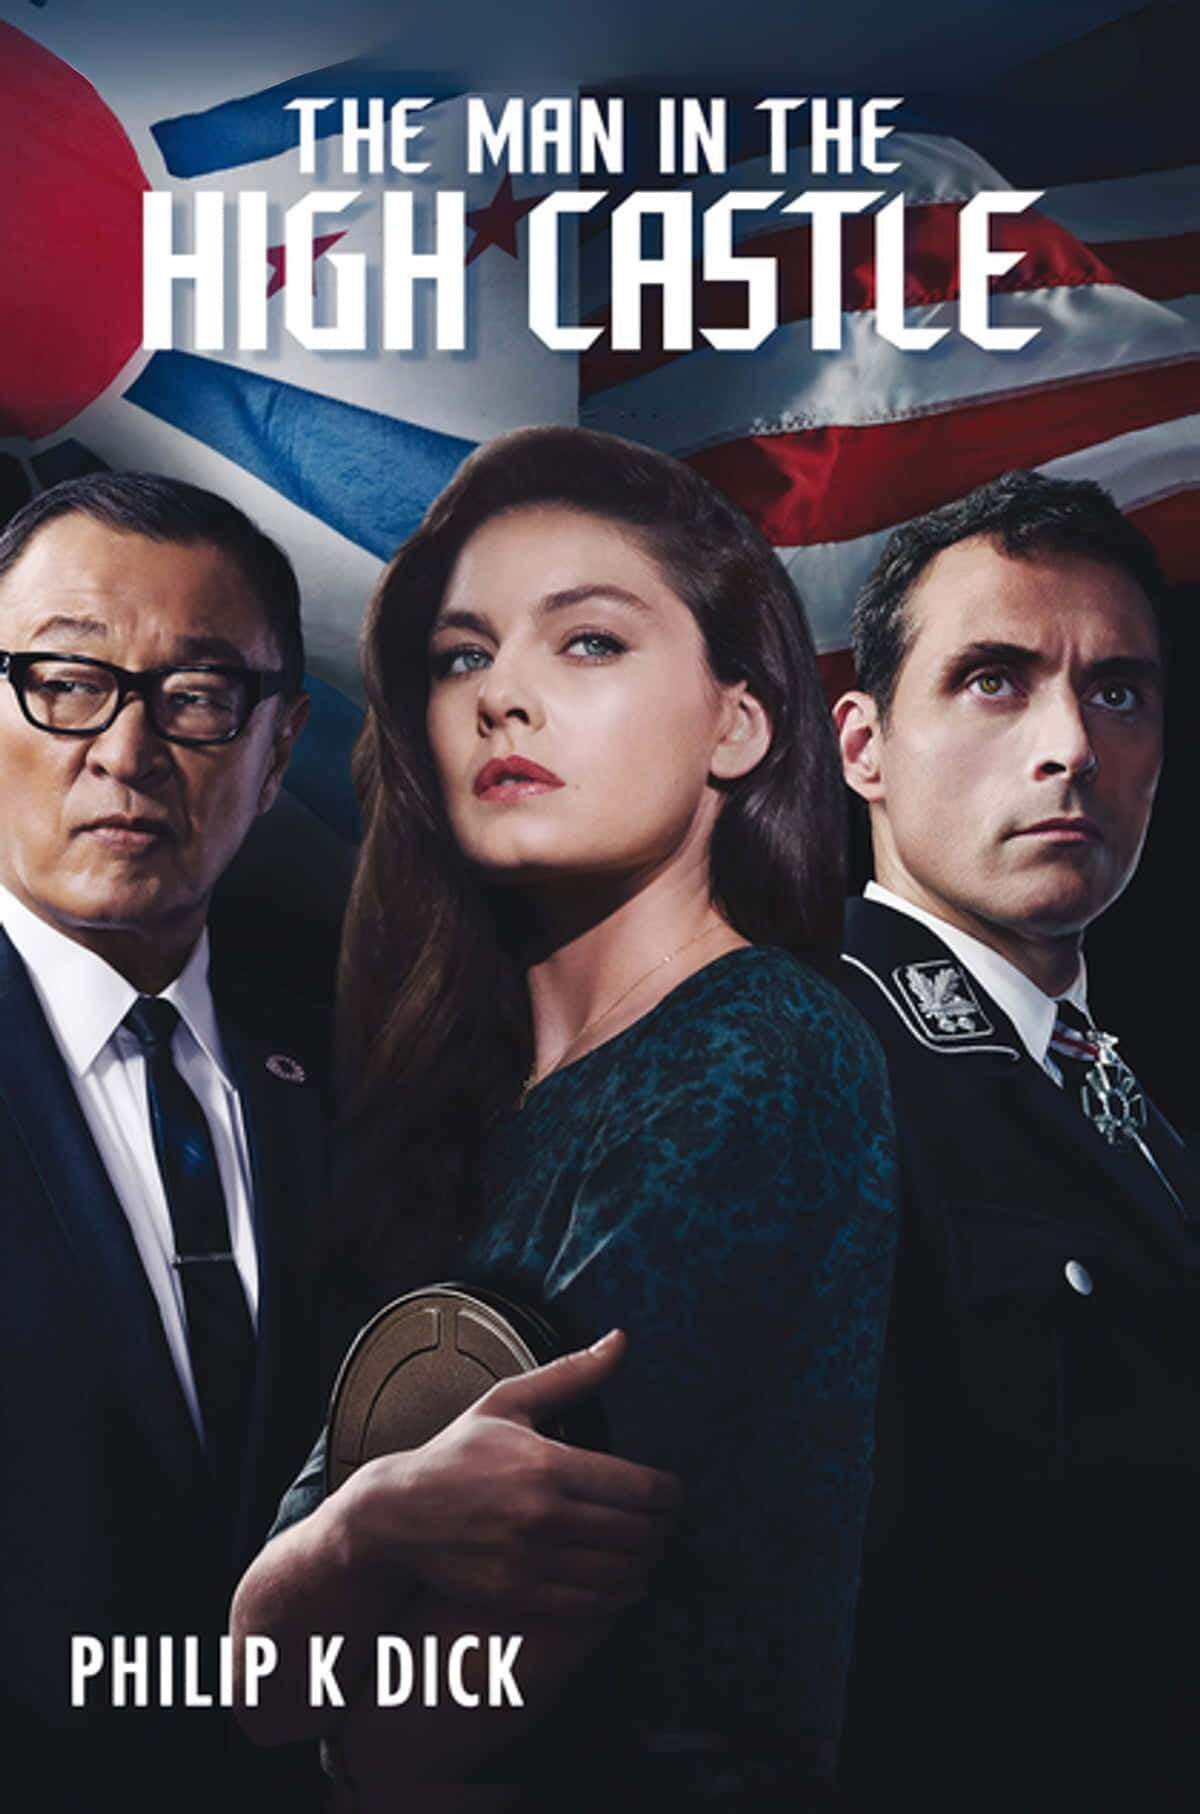 A Glimpse To Alternate History - The Man In The High Castle Wallpaper